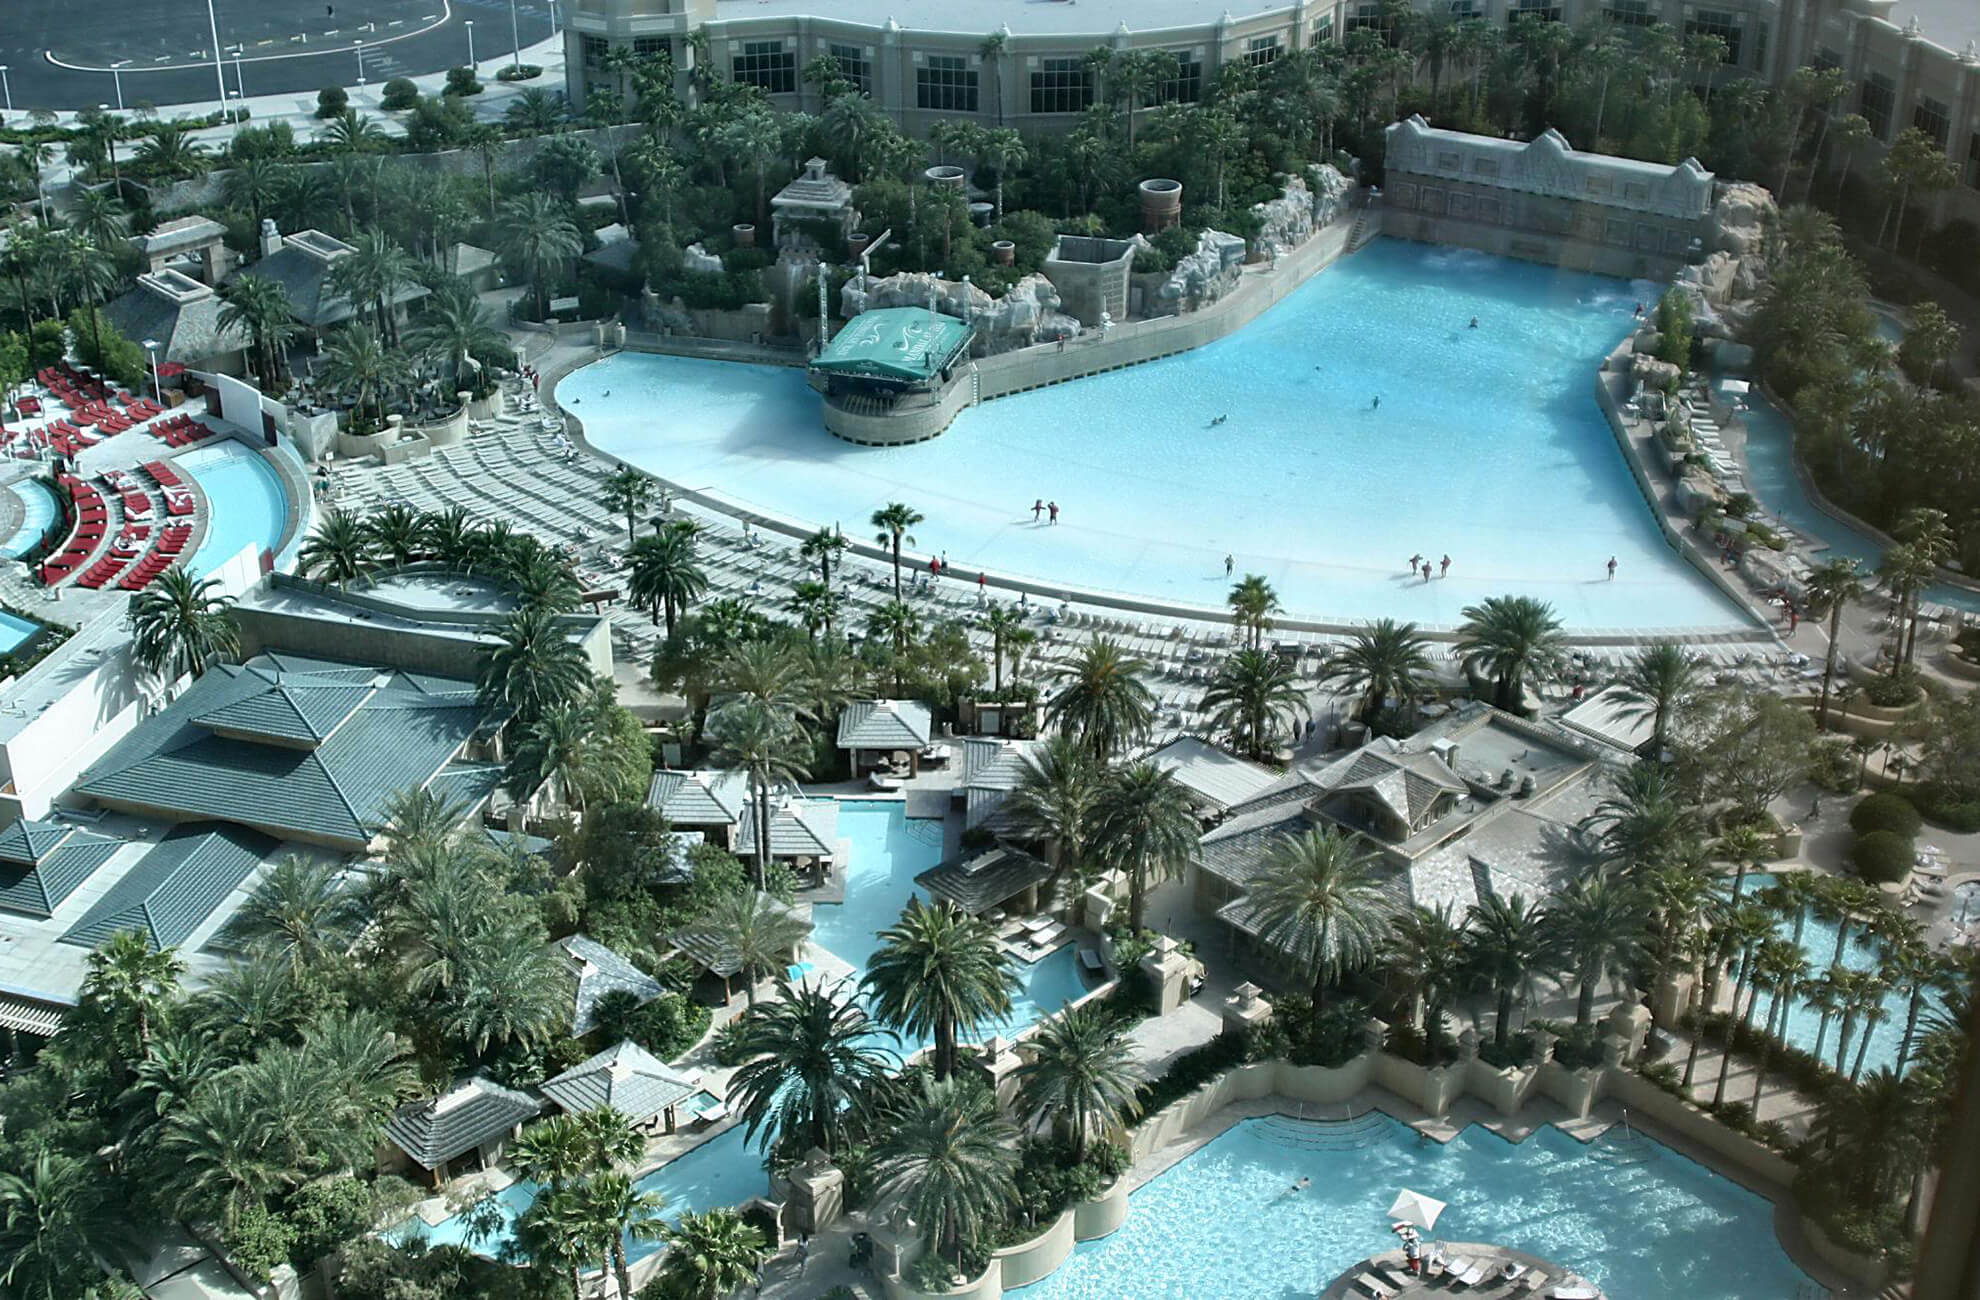 Mandalay Bay Beach and Wave Pool - Vegas, Baby! Time to Hit These Las Vegas  Pools